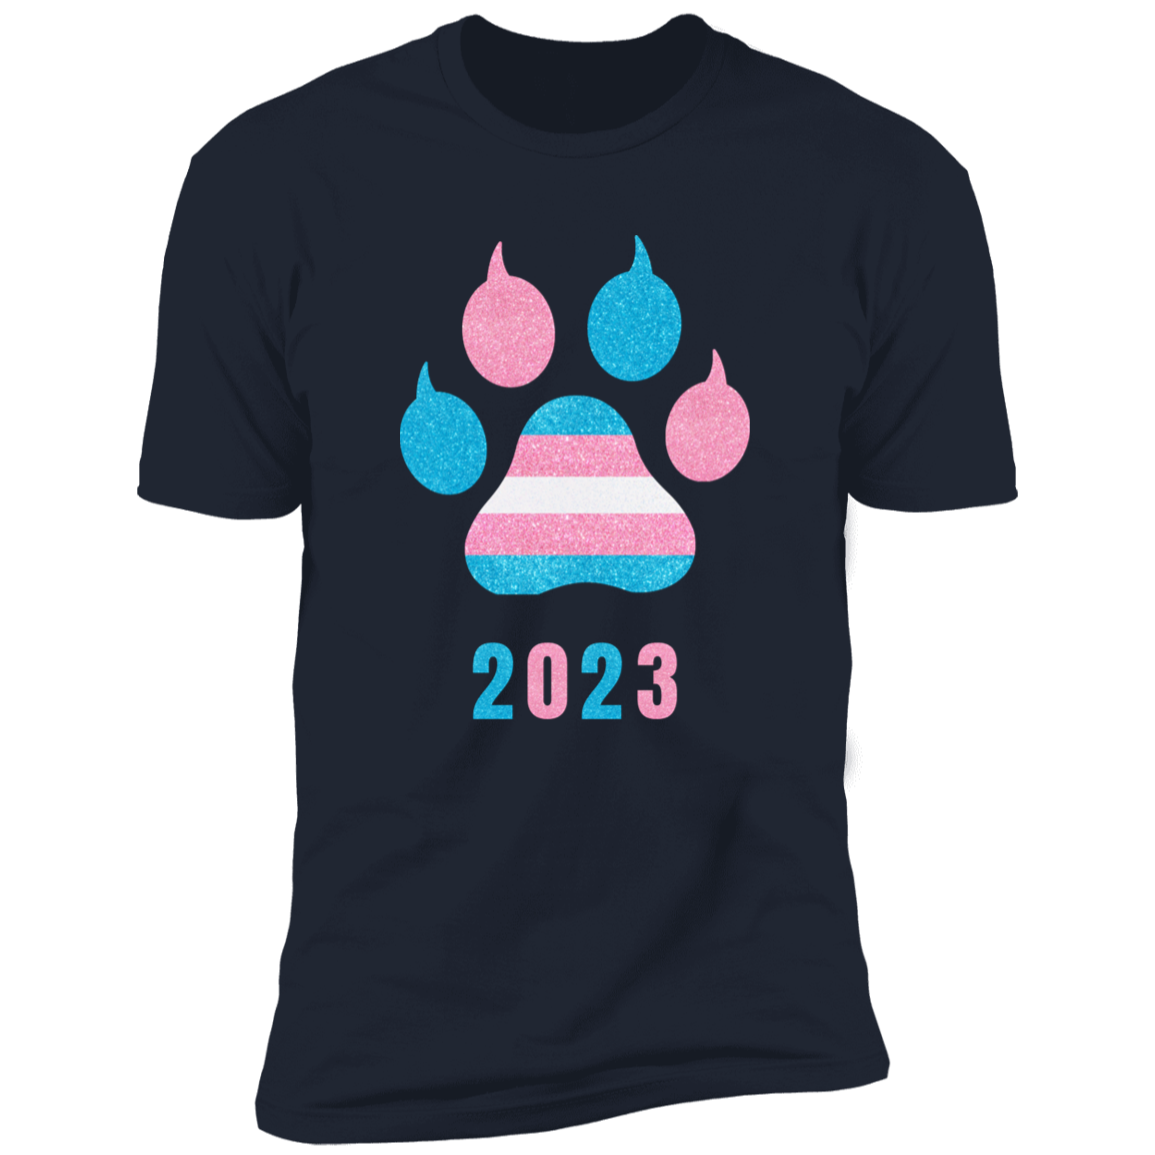 Trans Pride 2023 Cat Paw trans pride t-shirt,  trans cat paw pride shirt for humans, in navy blue